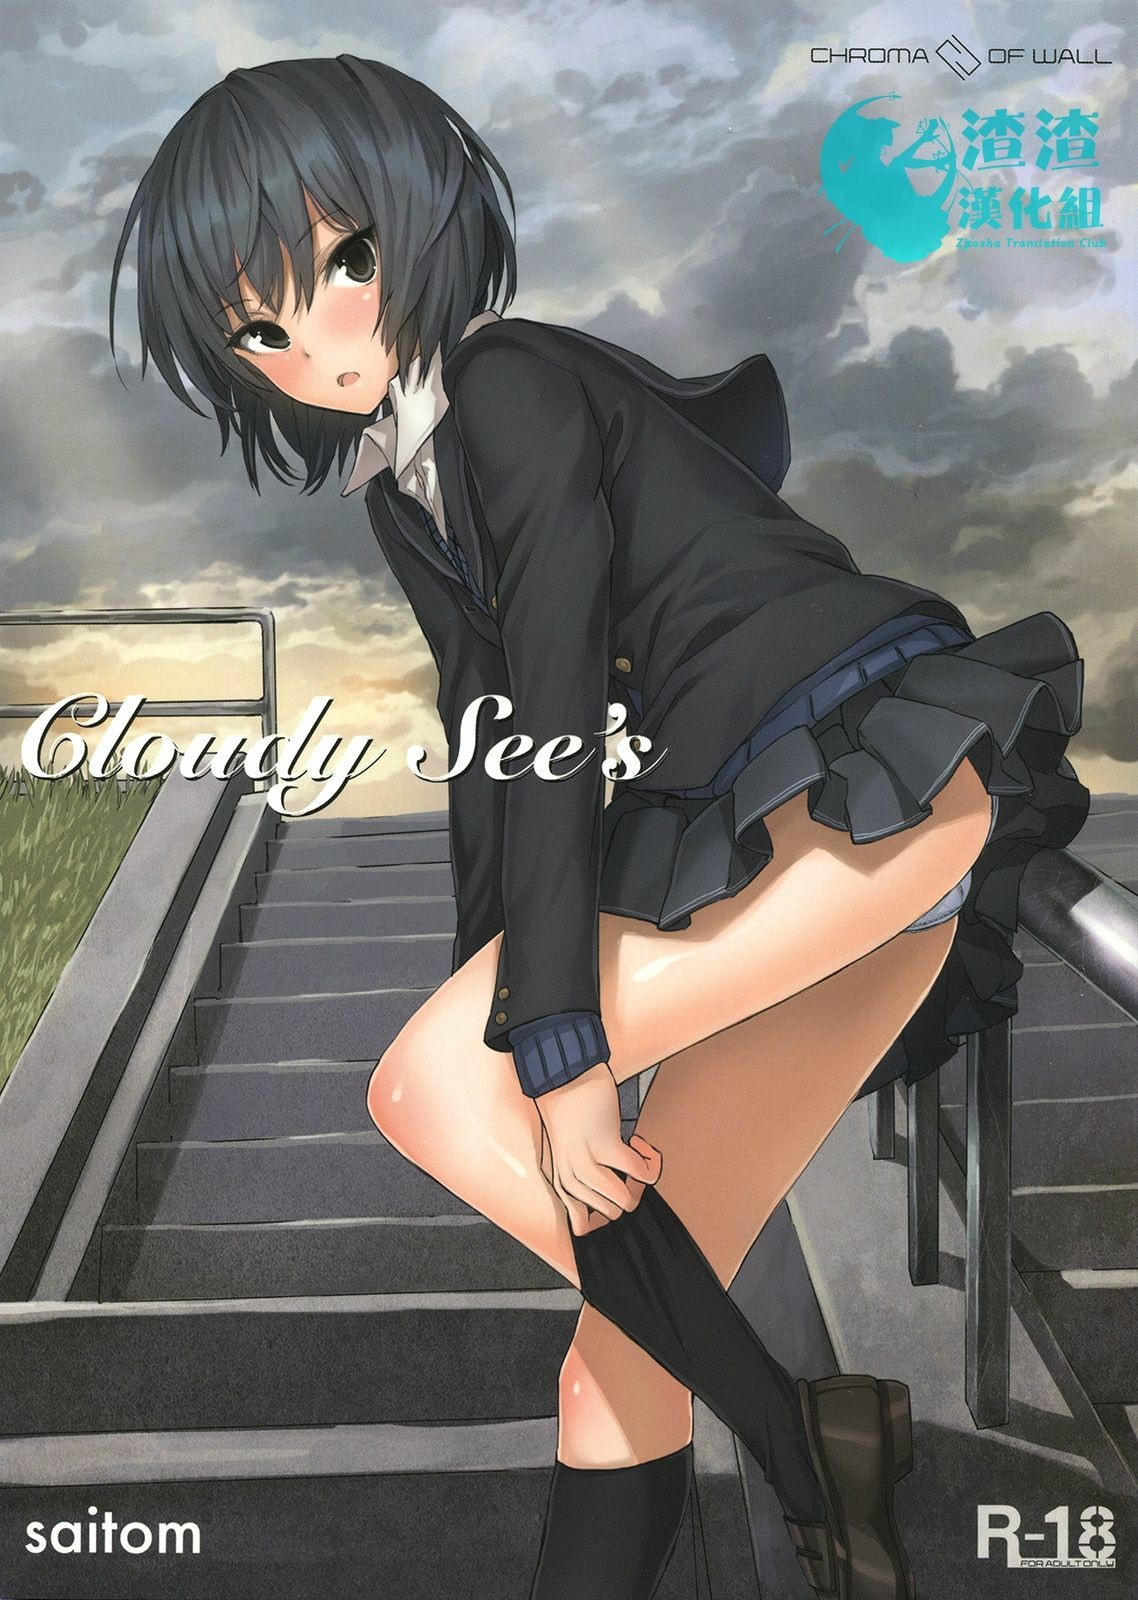 (COMIC1☆6) [Chroma of Wall (saitom)] Cloudy See's (Amagami) [Chinese] [渣渣汉化组] page 1 full